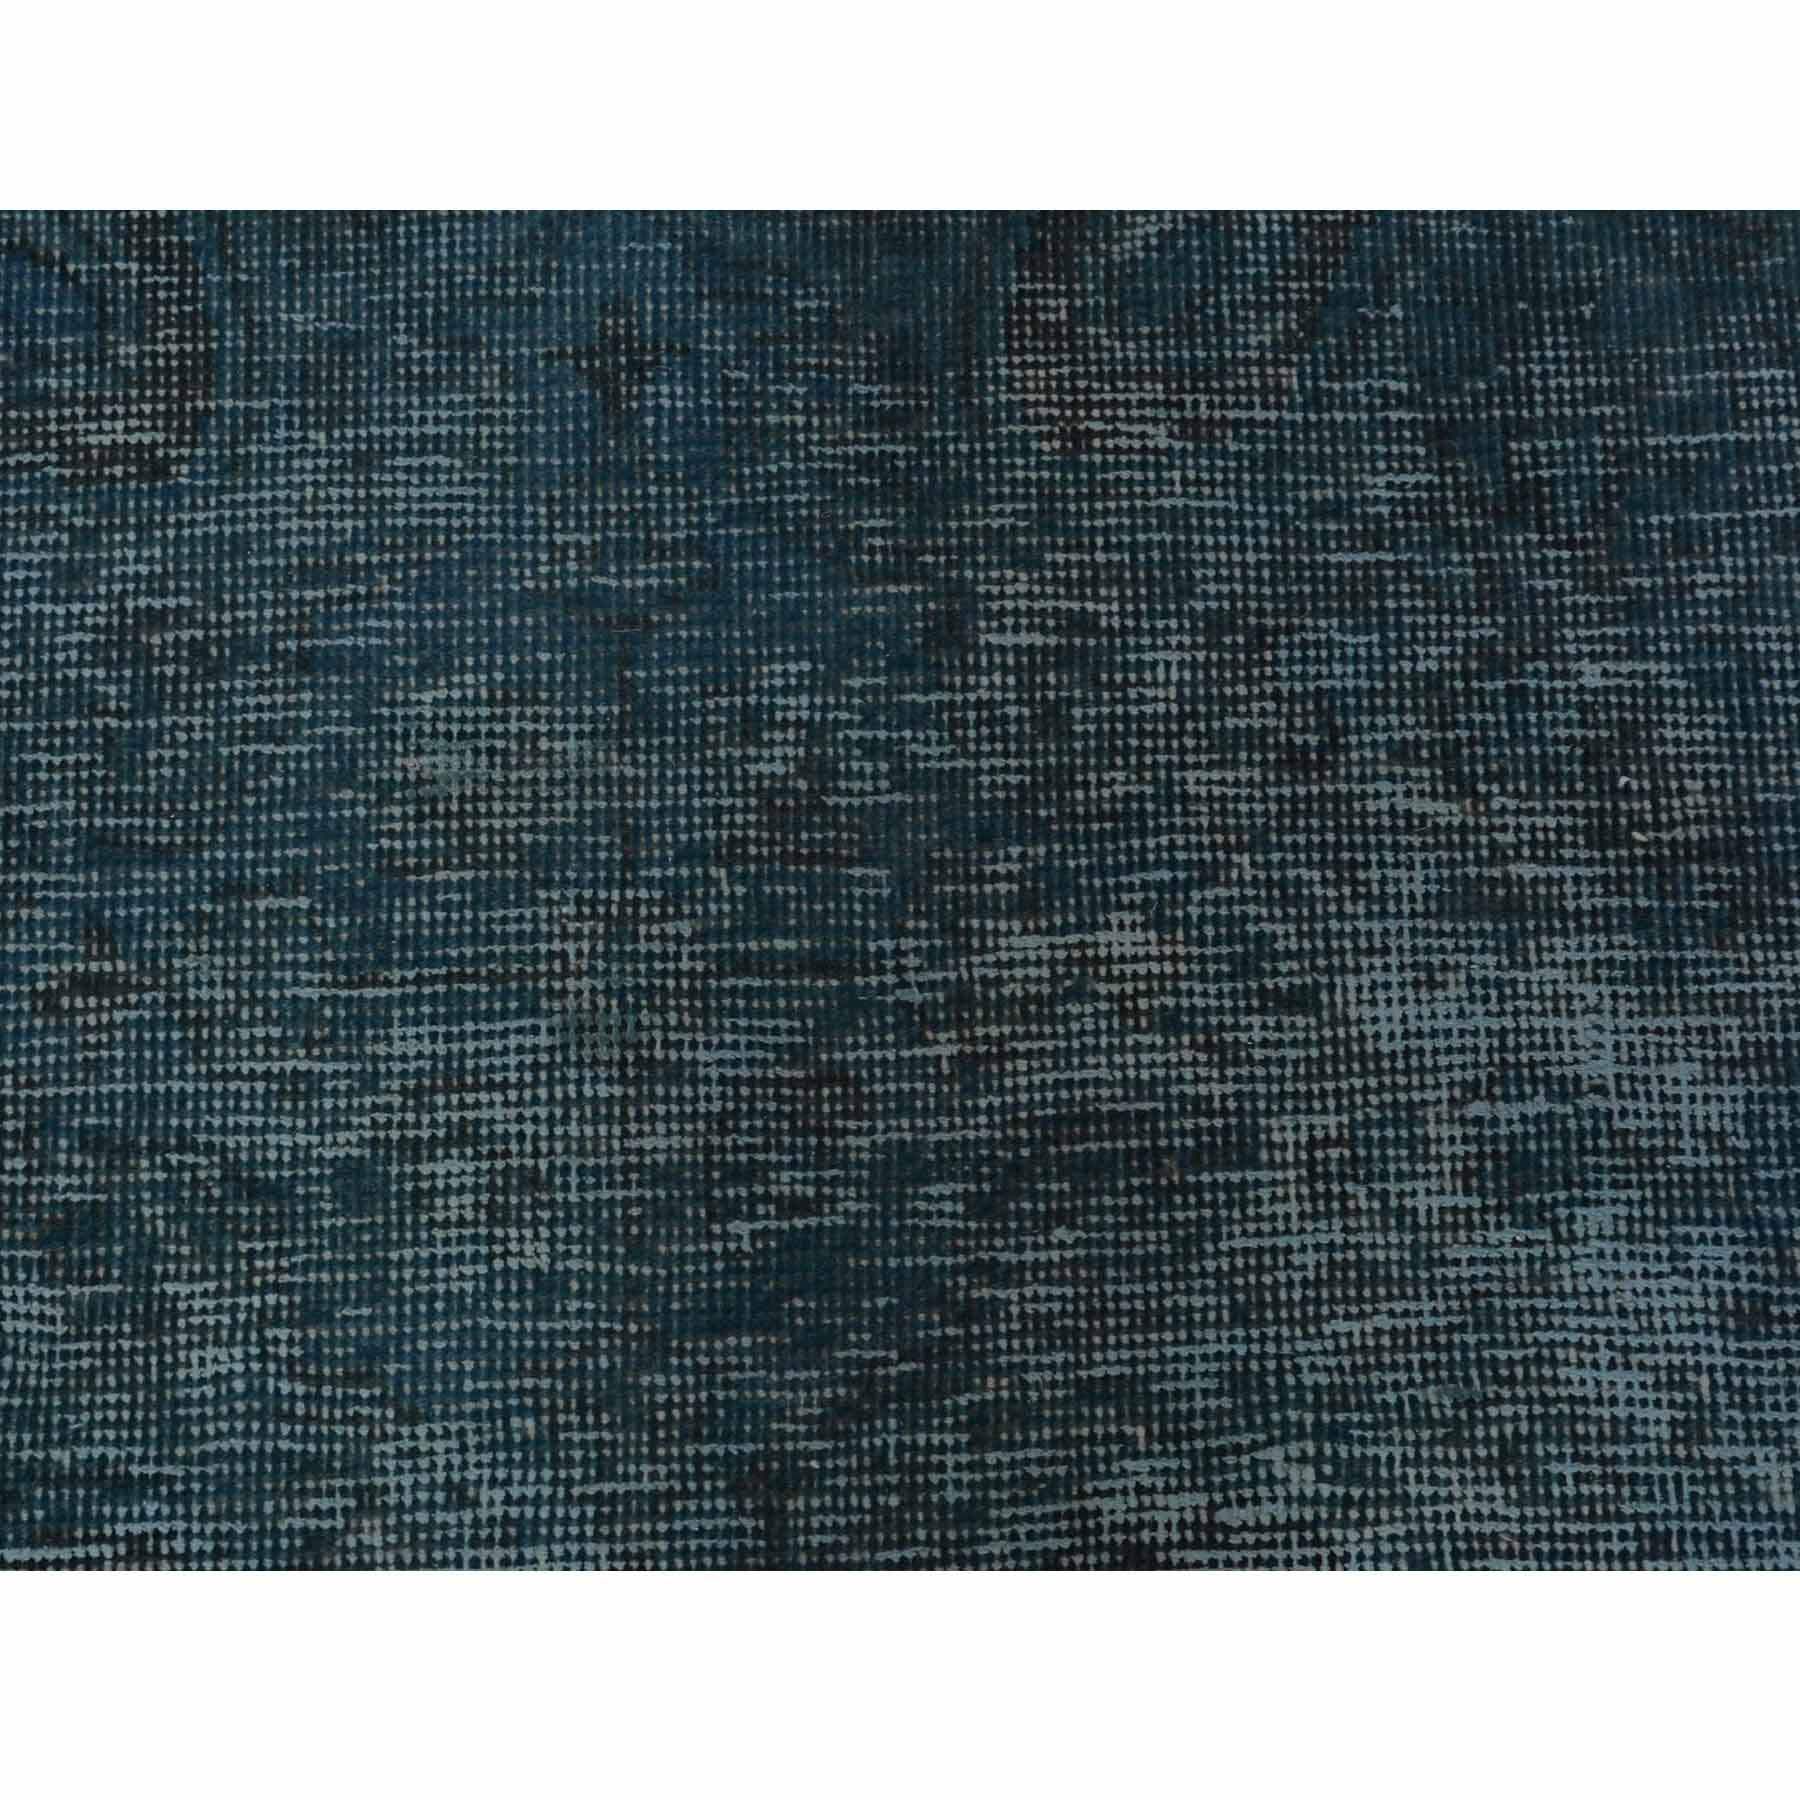 Overdyed-Vintage-Hand-Knotted-Rug-286685